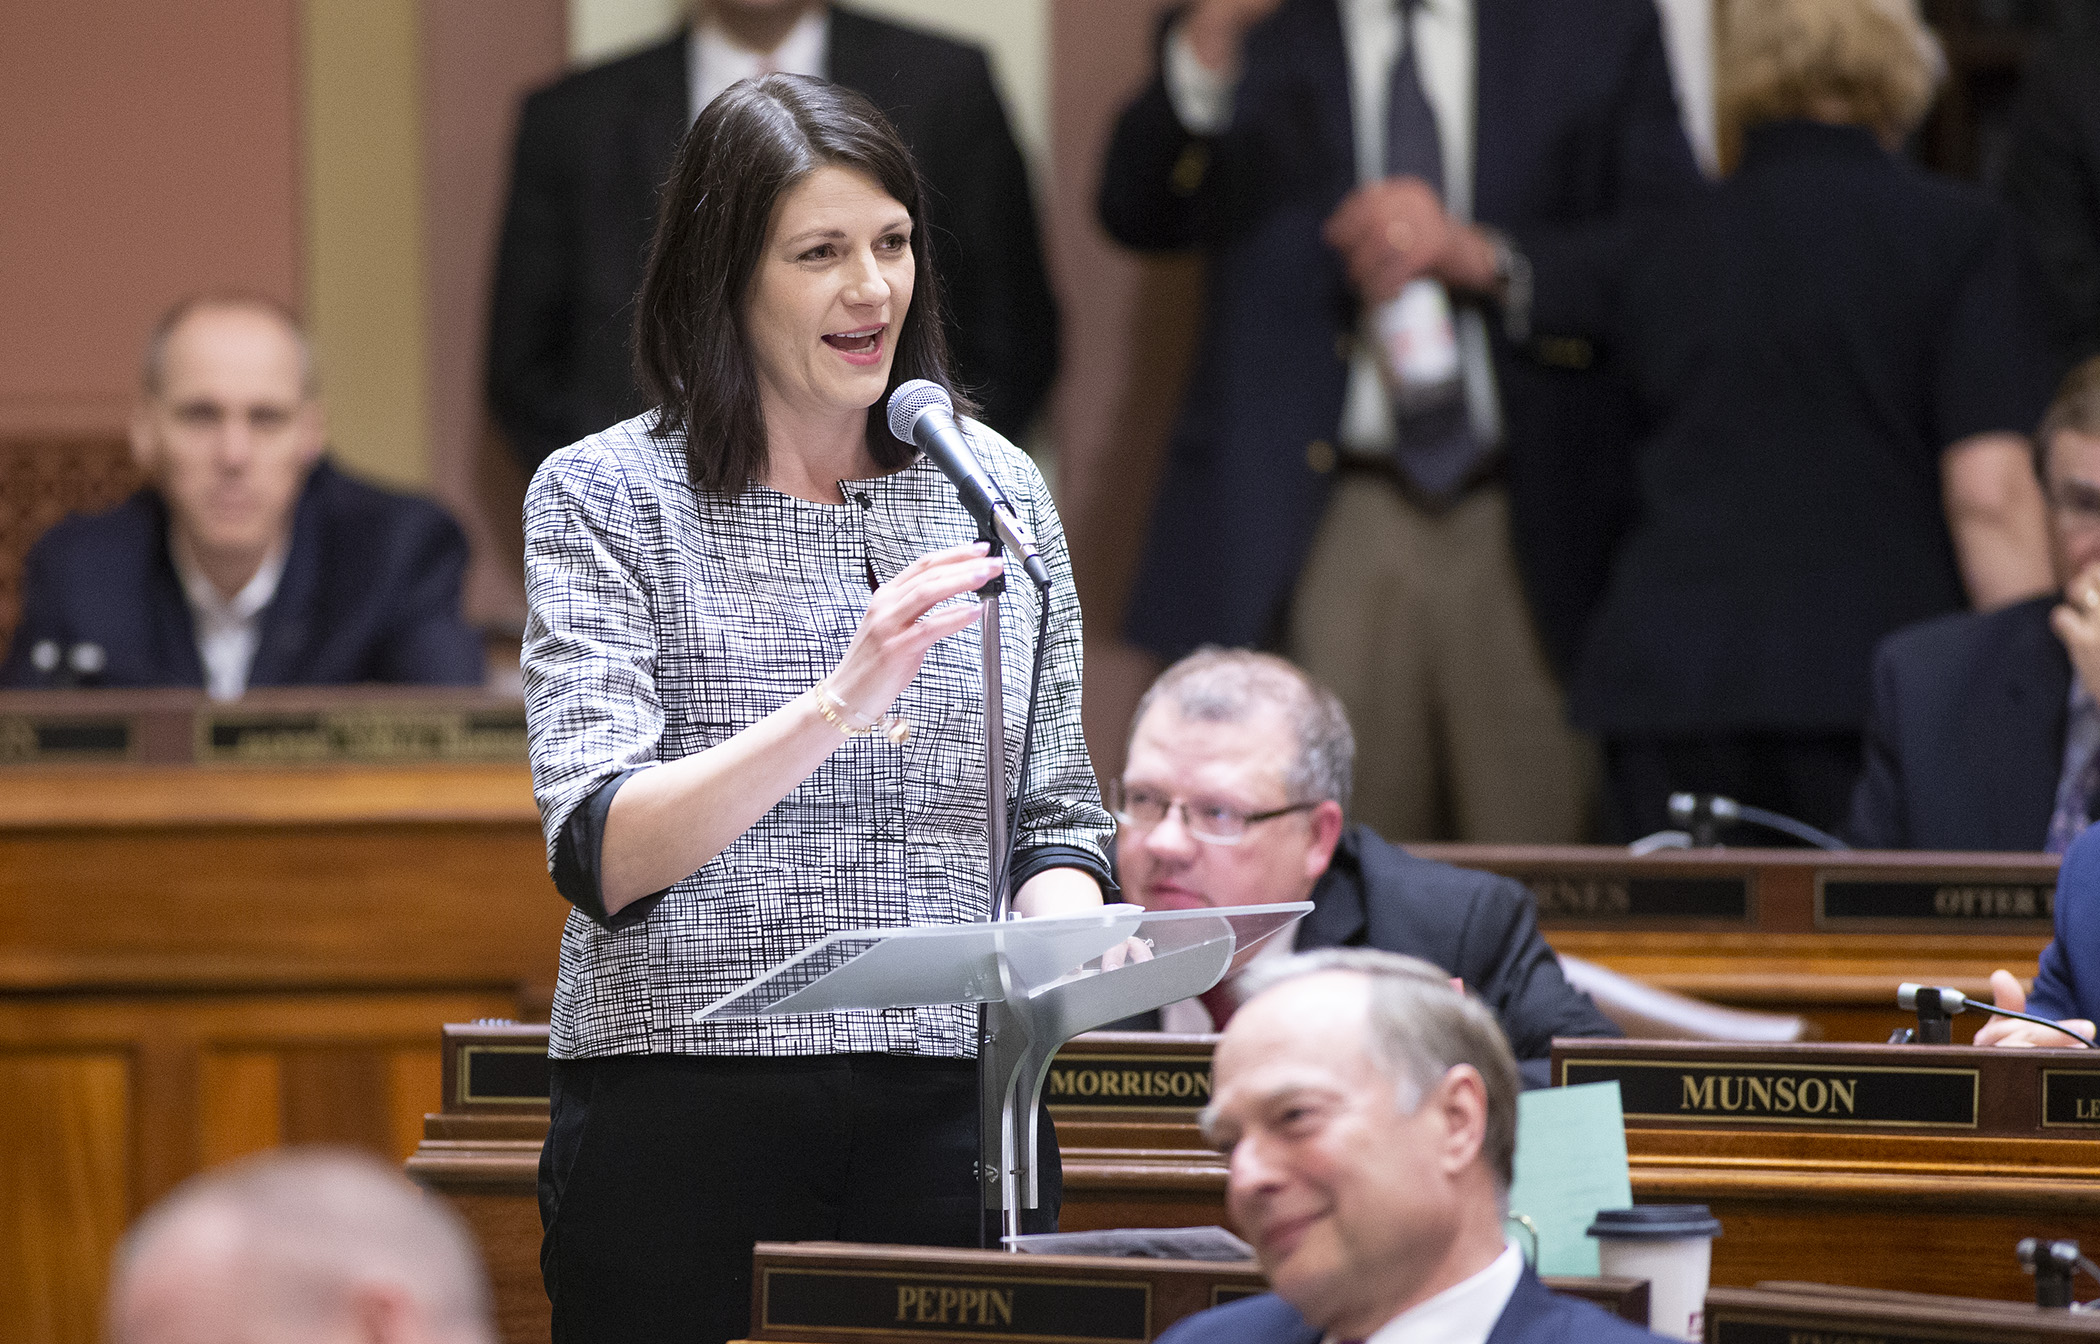 House Majority Leader Joyce Peppin moves to adjourn the House Sine Die May 20 to end the 2017-18 legislative session. Photo by Paul Battaglia